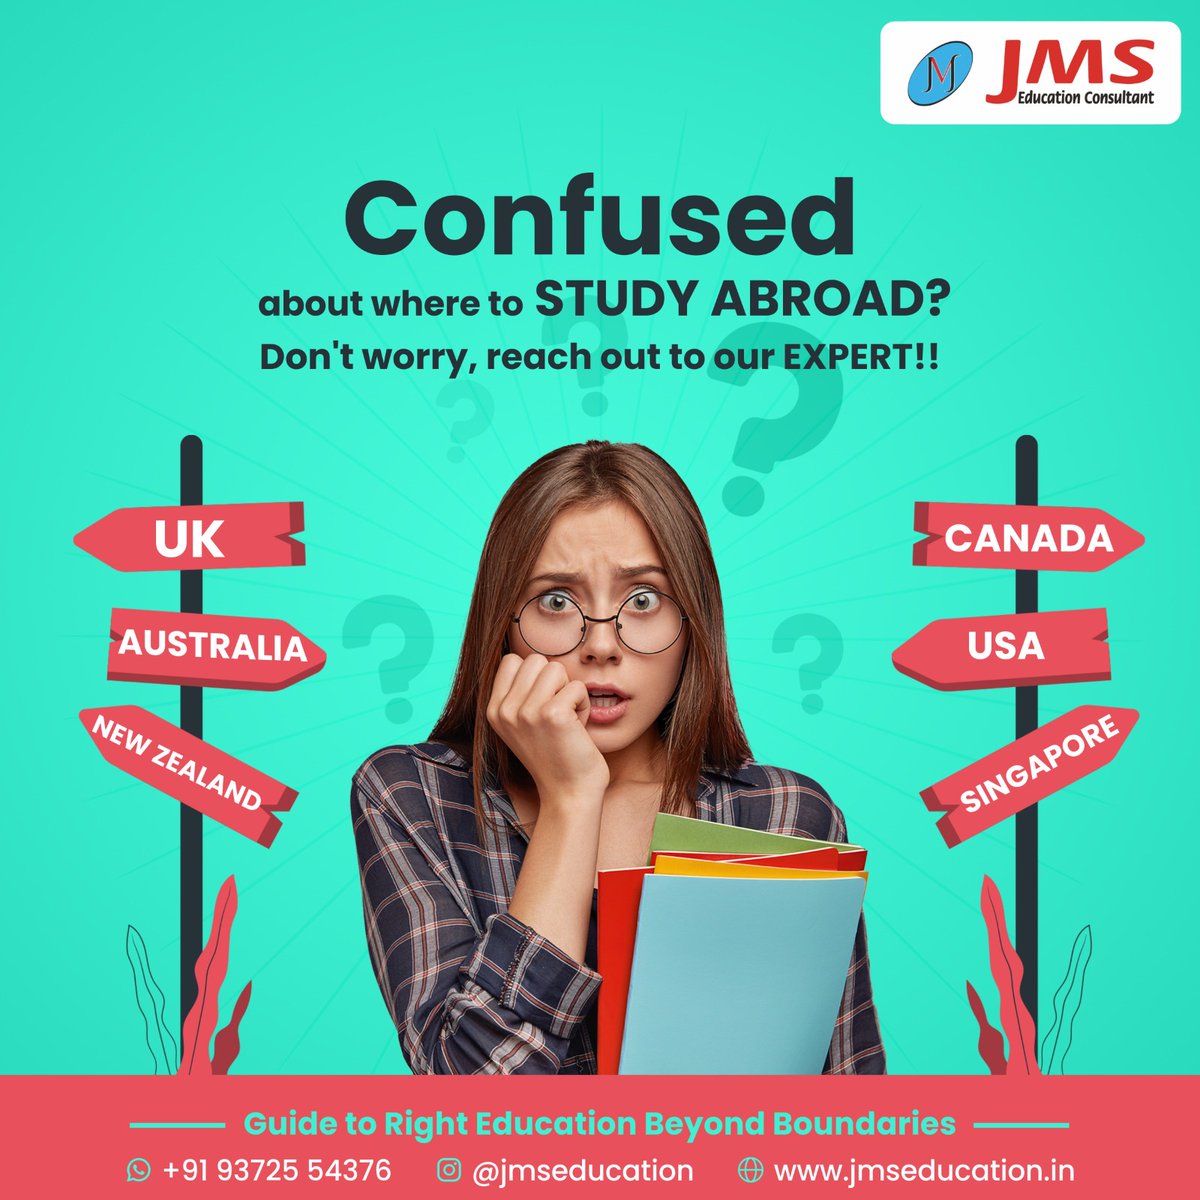 Want guidance to know which is the right study destination for you?

You are at the right place ✅
Contact us now👉 +91 93725 54376

#jmseducationconsultant #jmseducation #studyabroad #studyabroadconsultants #highereducationabroad #higherstudiesabroad